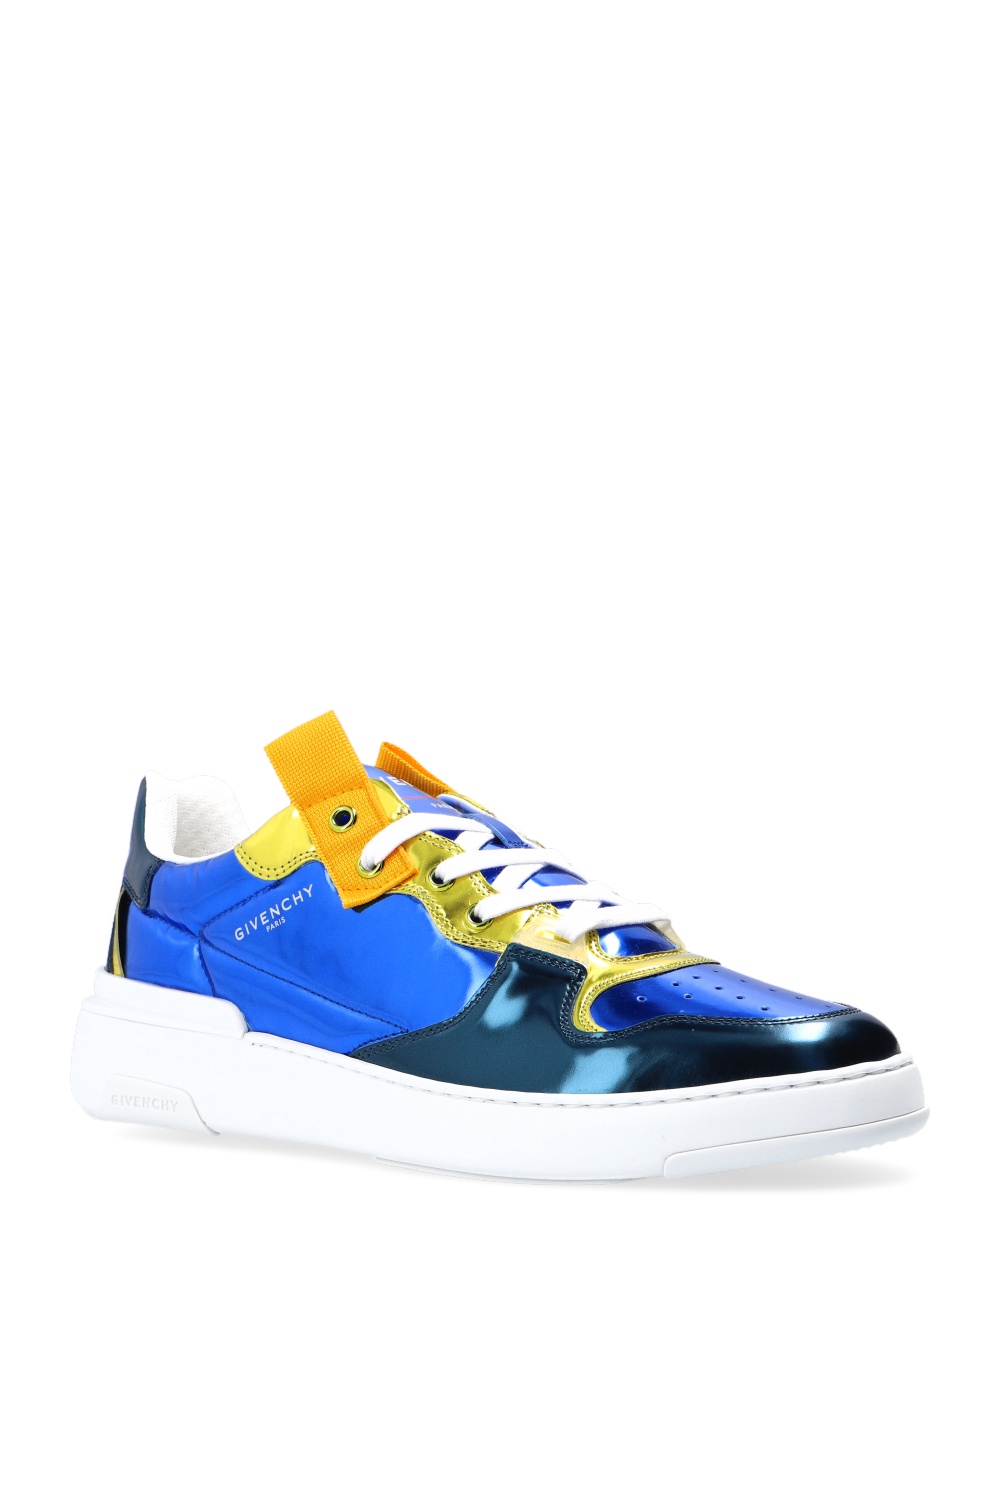 Givenchy 'Wing' sneakers | Men's Shoes | Vitkac